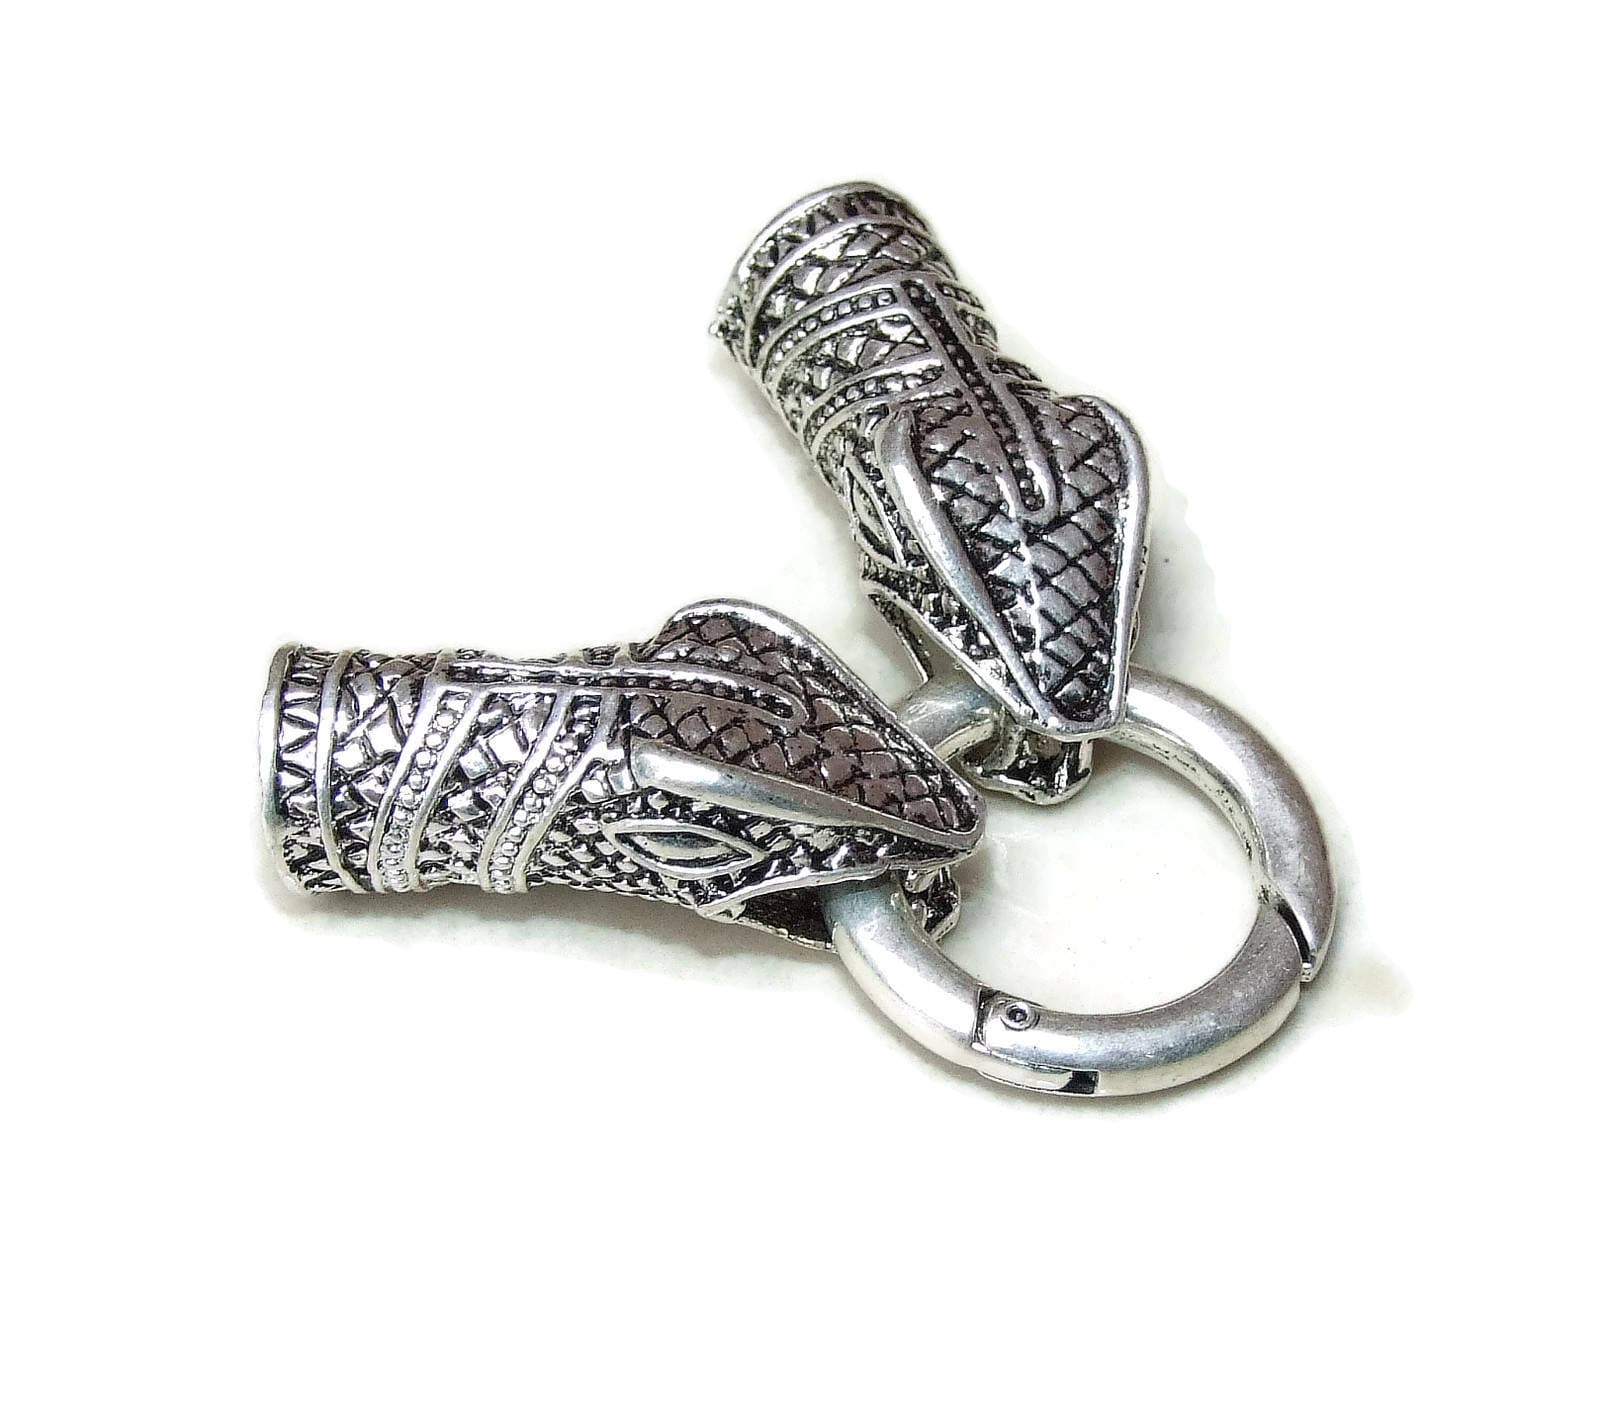 Snake Head Cord End Cap Clasp Lock Ring - Silver Tone - Dragon Head - – EDG  Beads and Gems